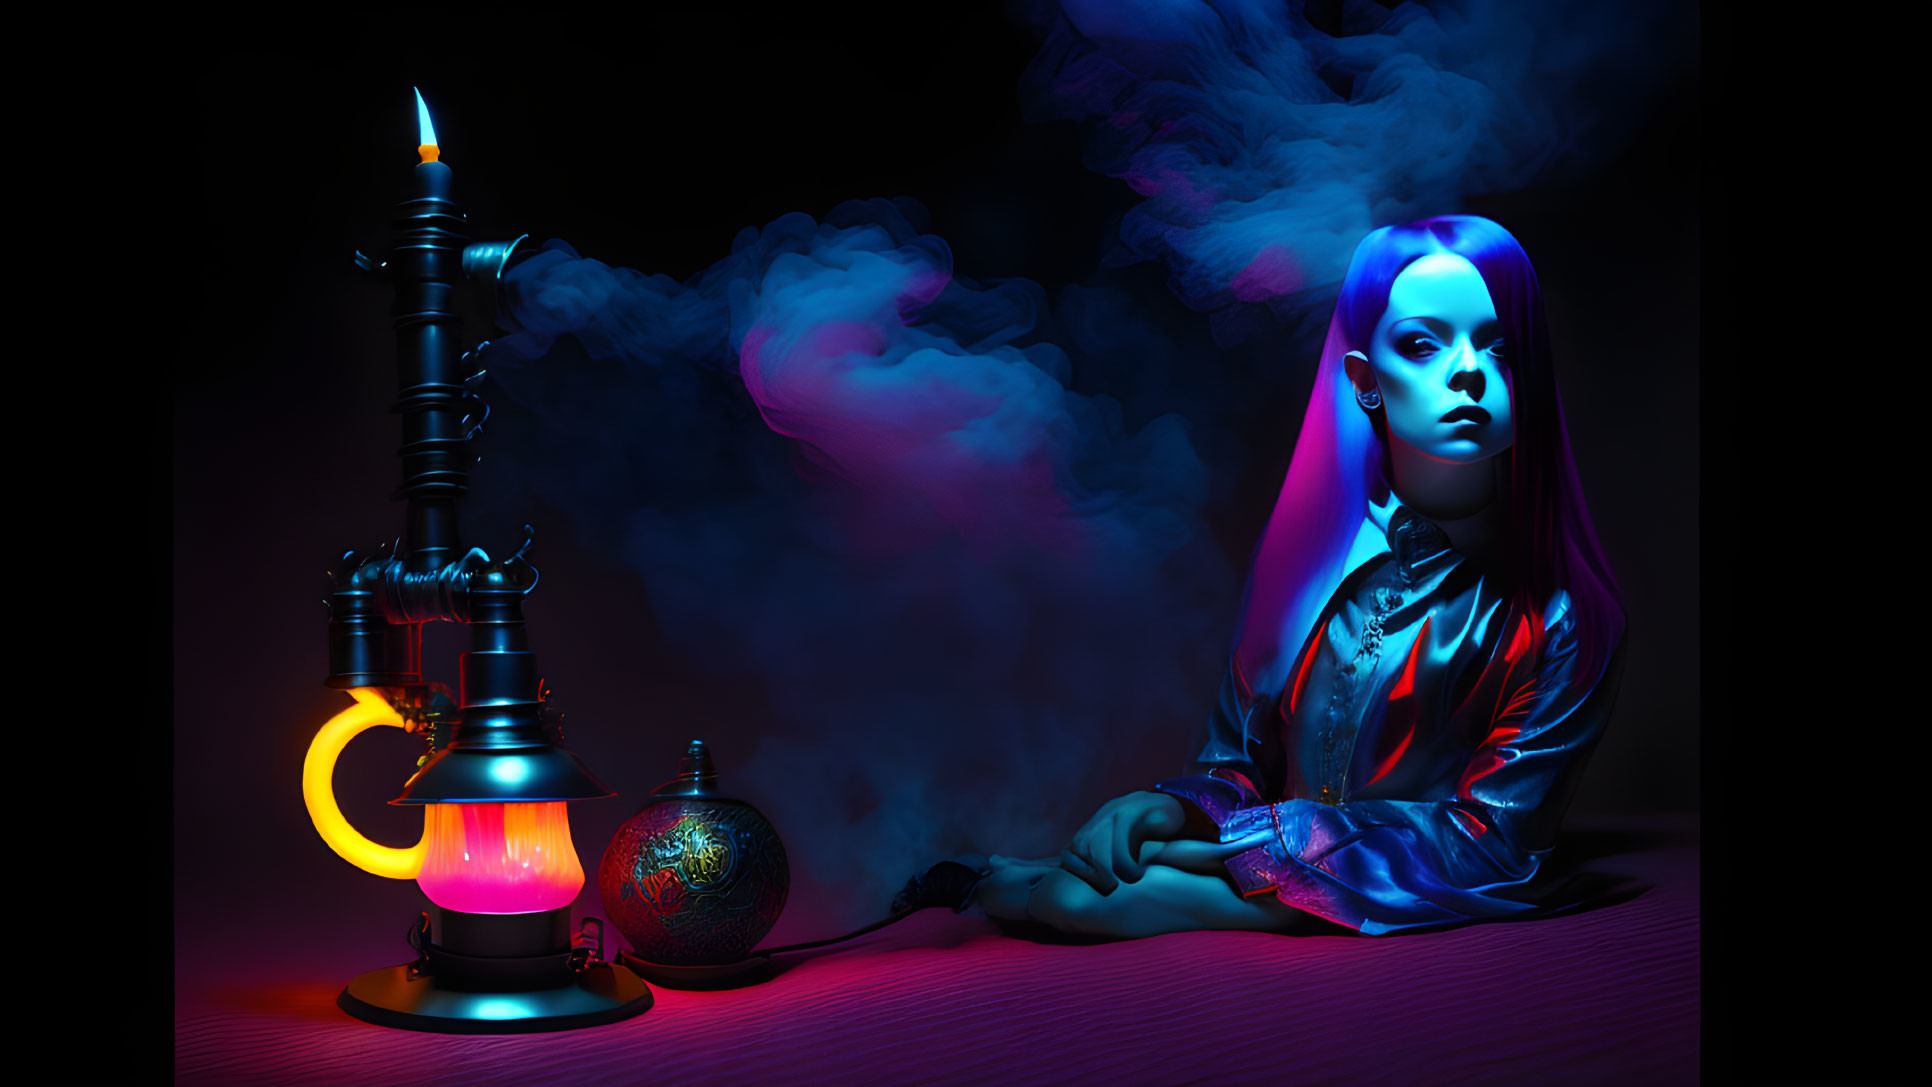 Stylized image of woman with purple hair in futuristic outfit next to glowing hookah under dramatic lighting